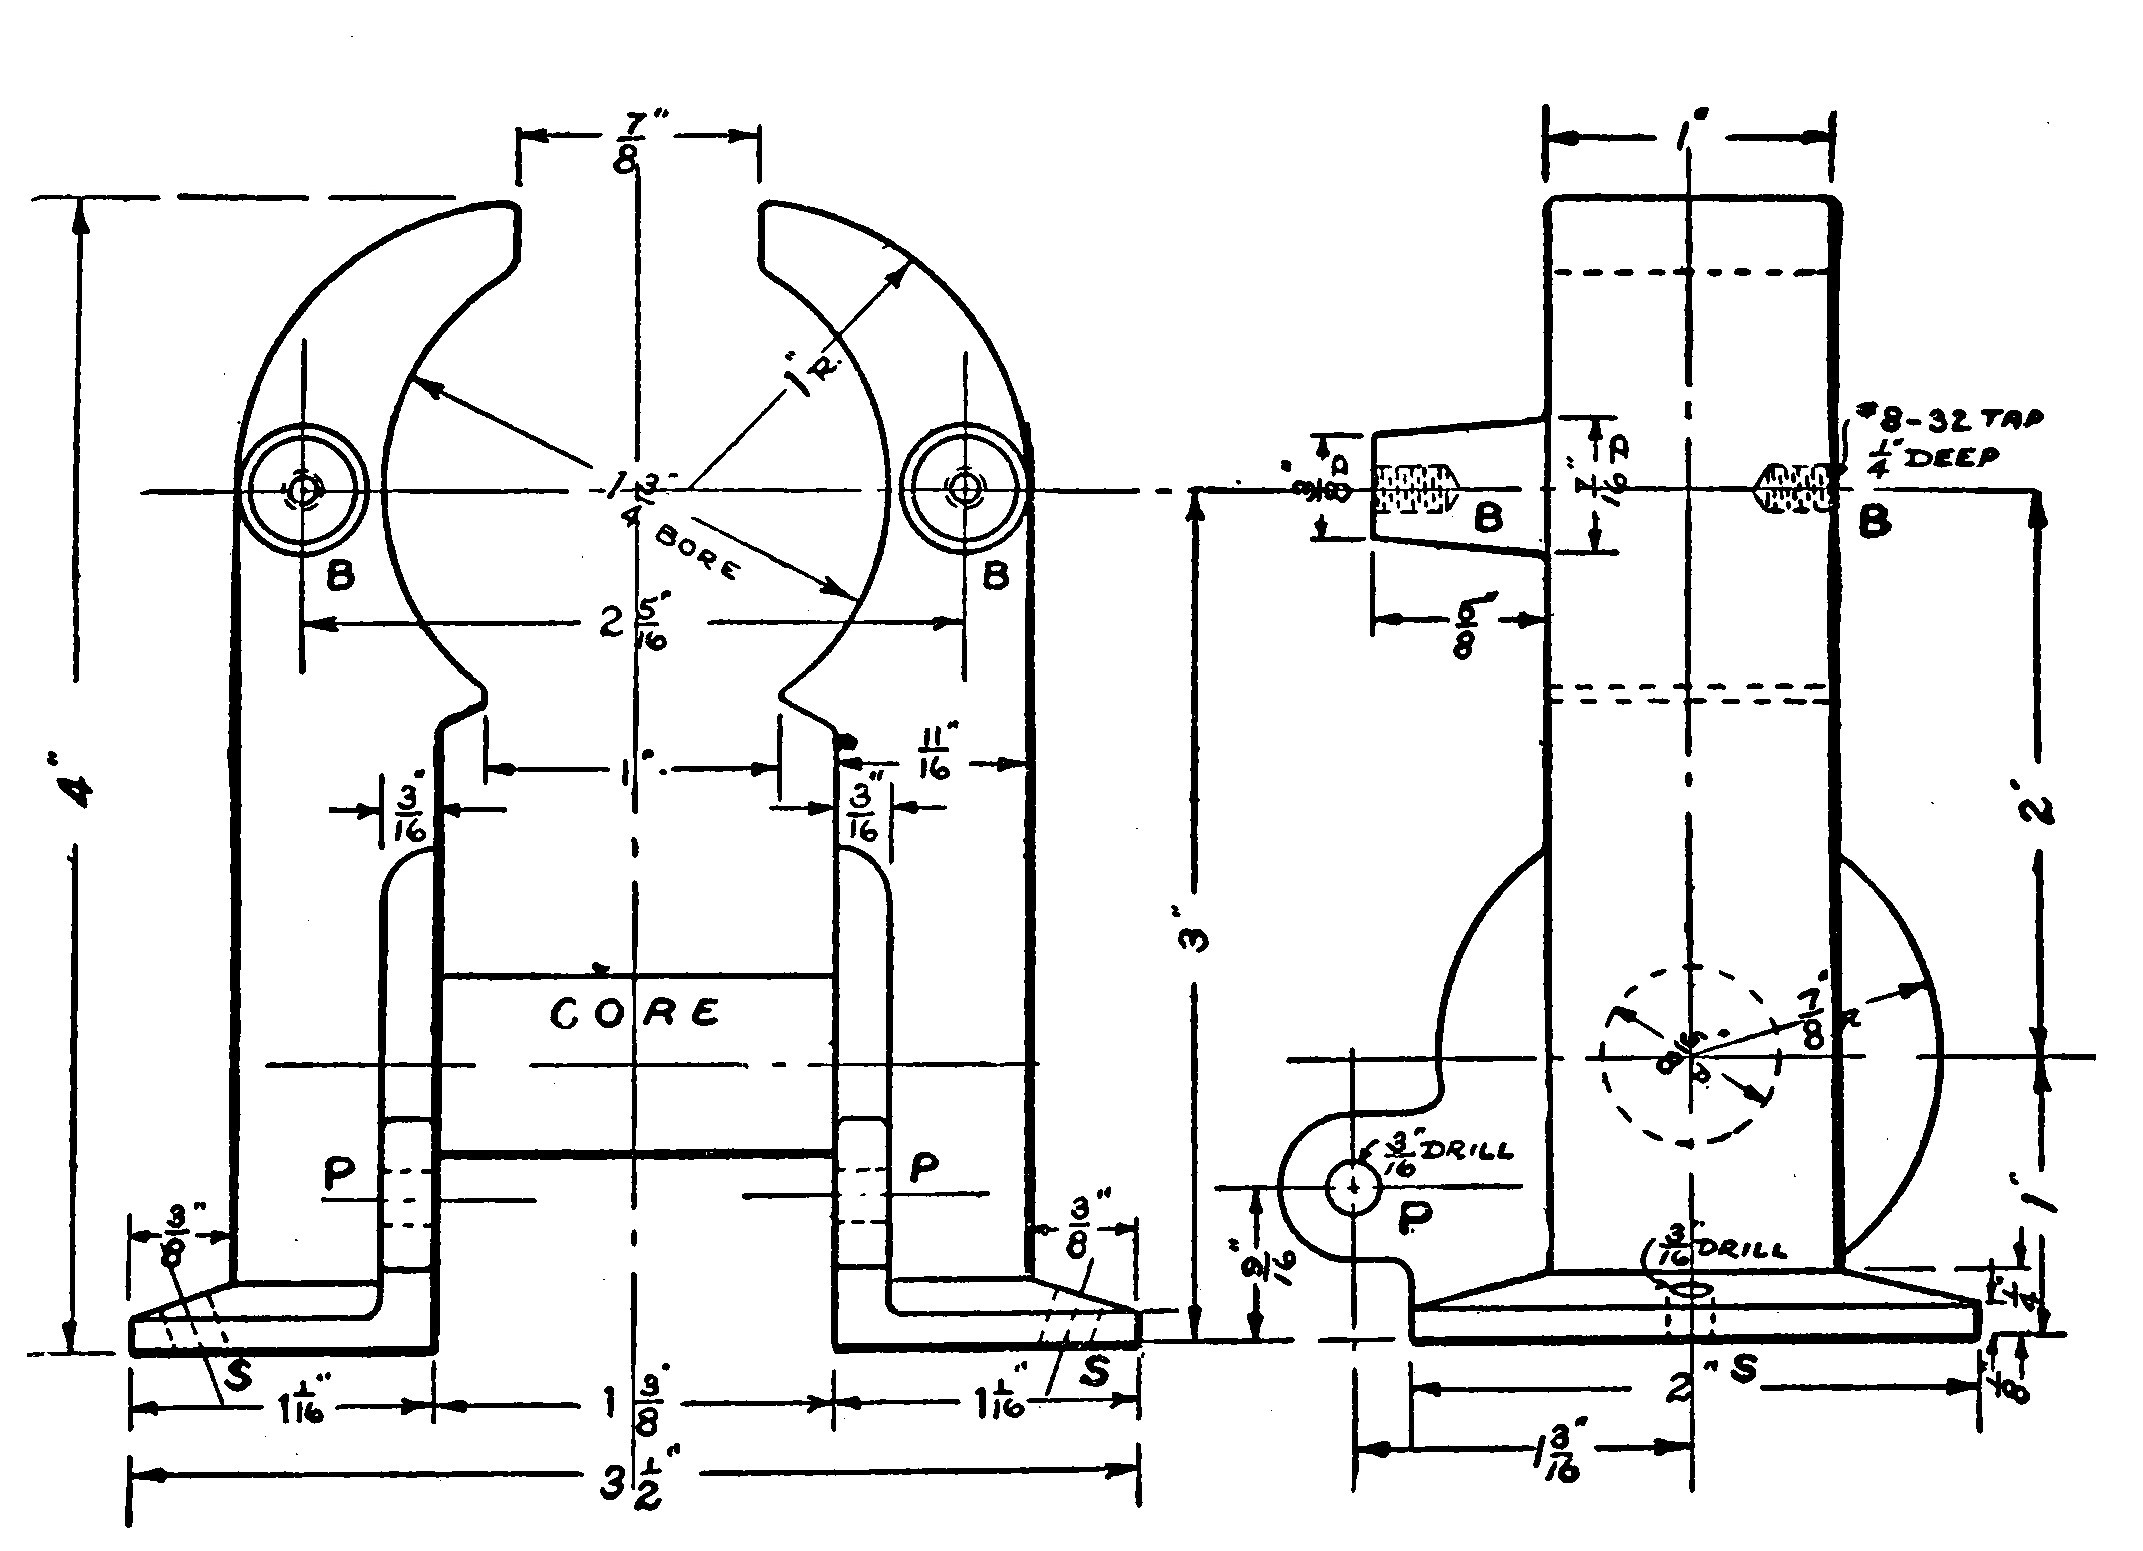 FIG. 60.—Details of the Field Frame of the Vertical Motor.